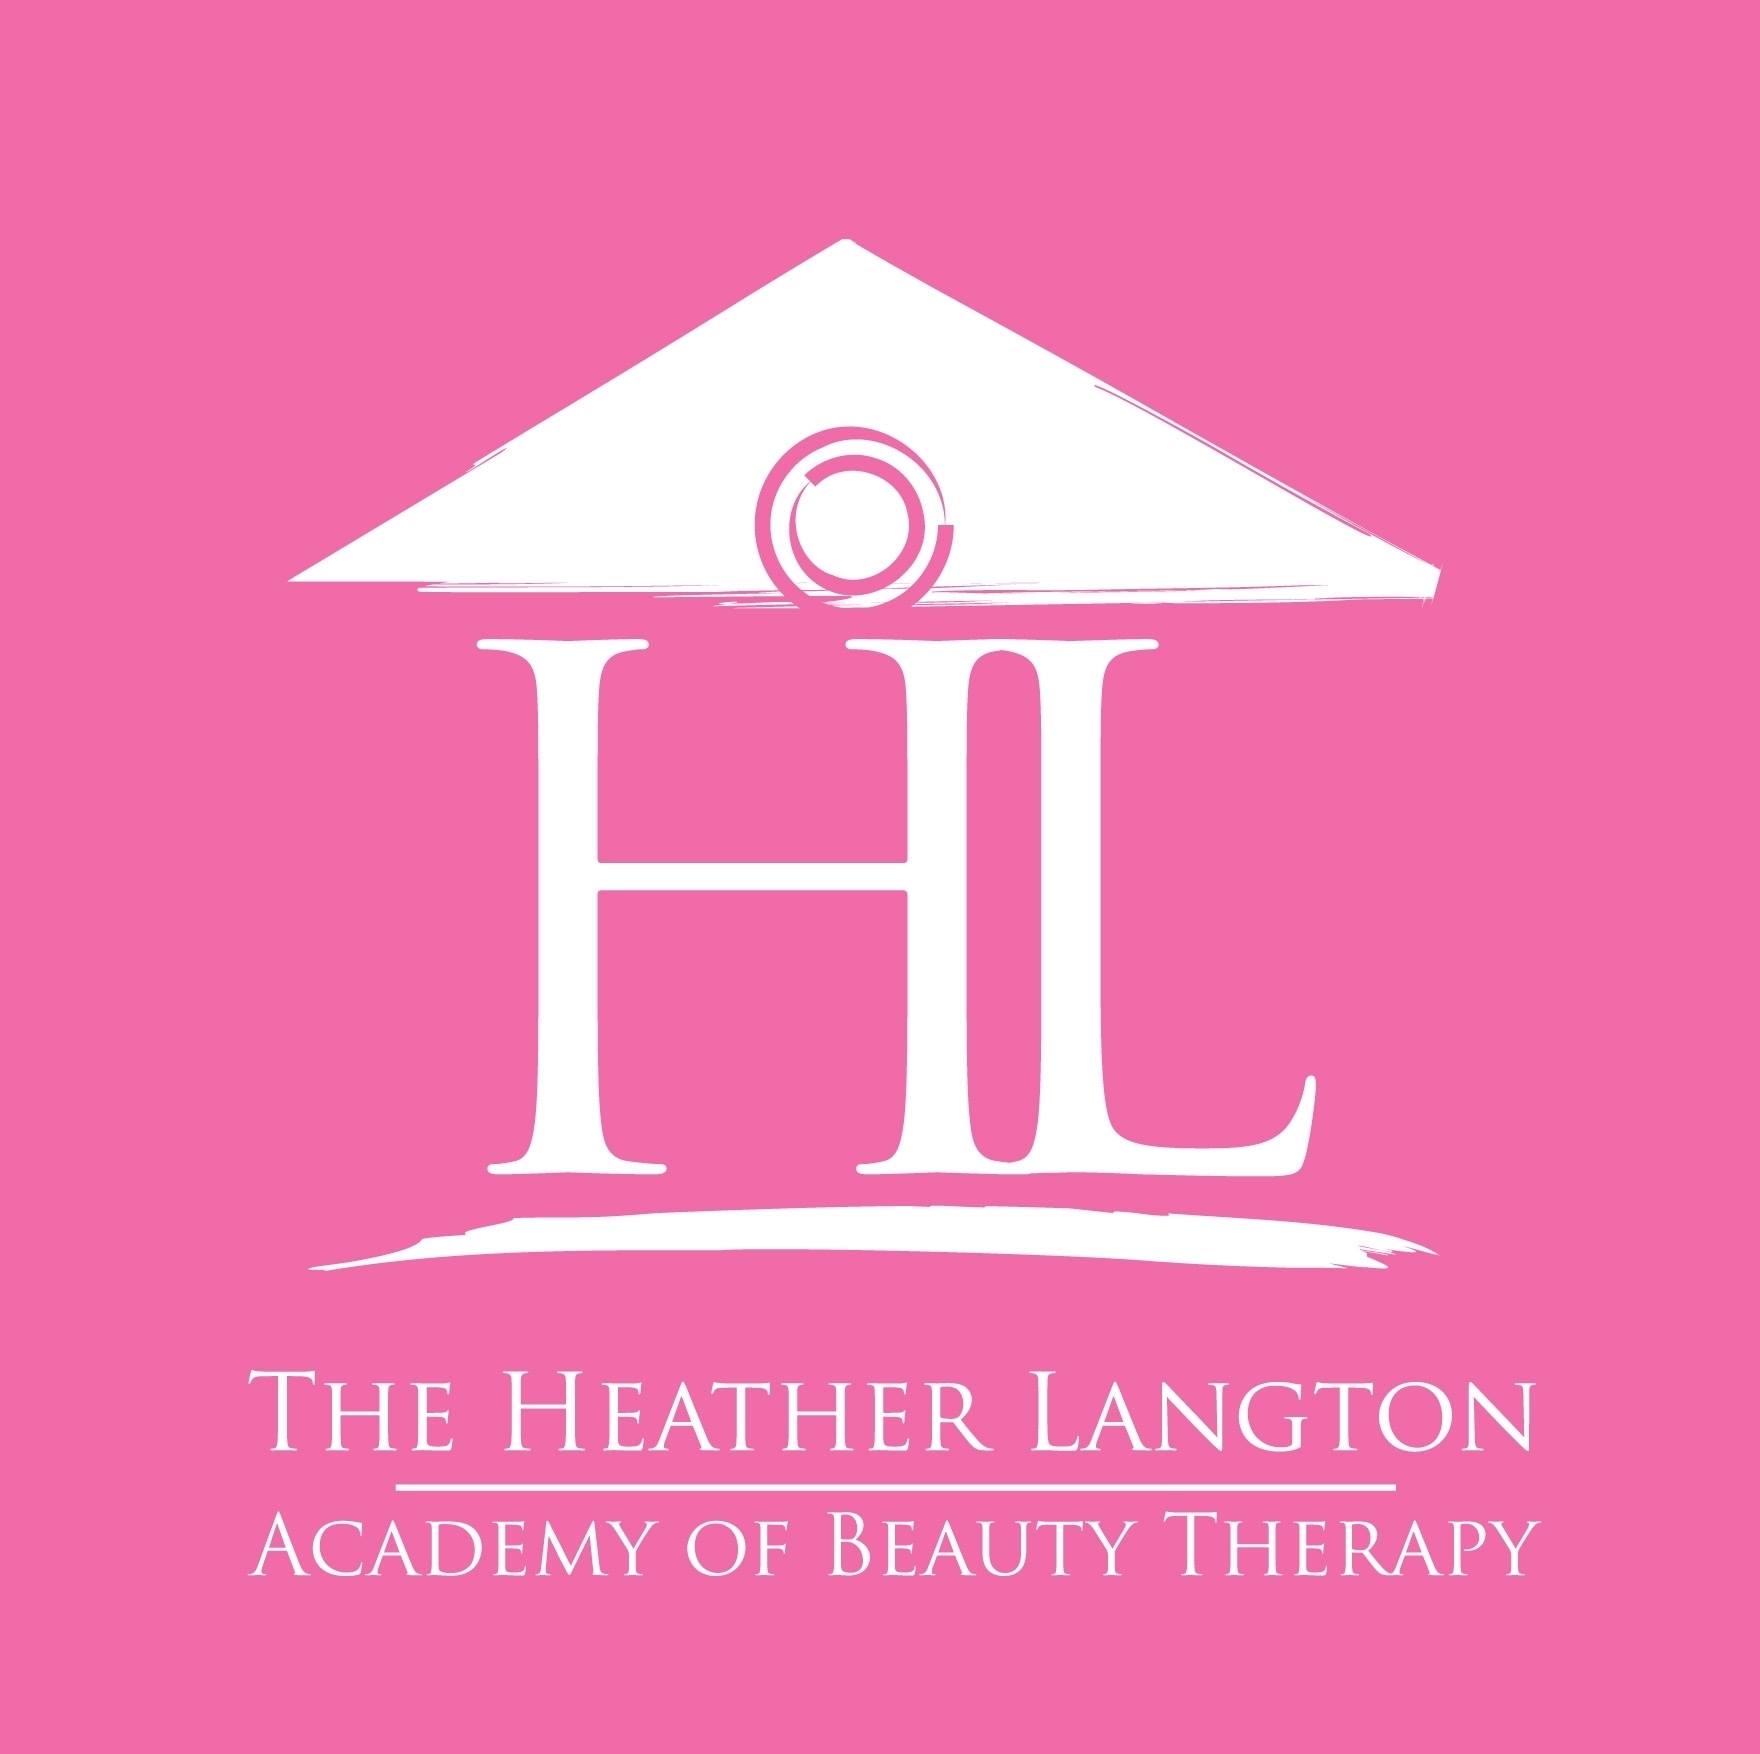 Heather Langton Academy of Beauty Therapy Logo